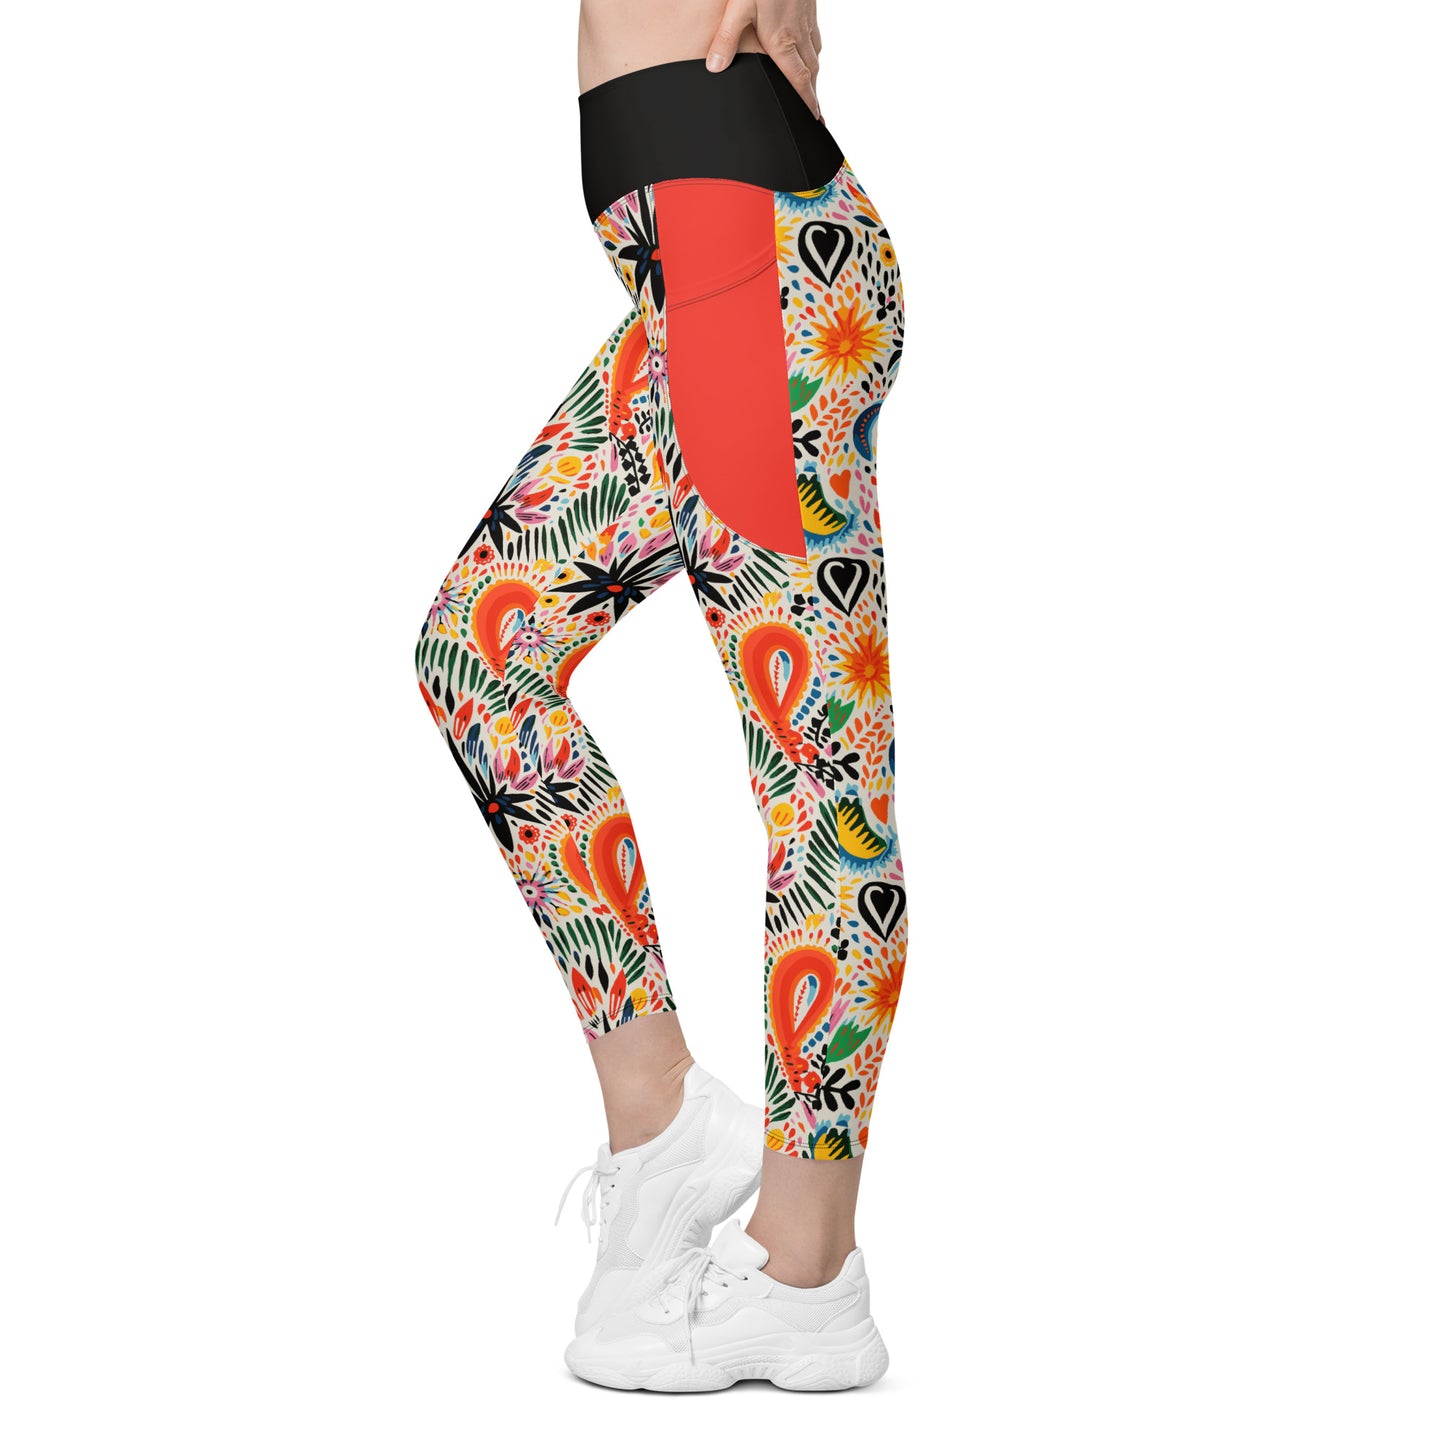 Edelweiss High Waist 7/8 Recycled Yoga Leggings / Yoga Pants with Pockets